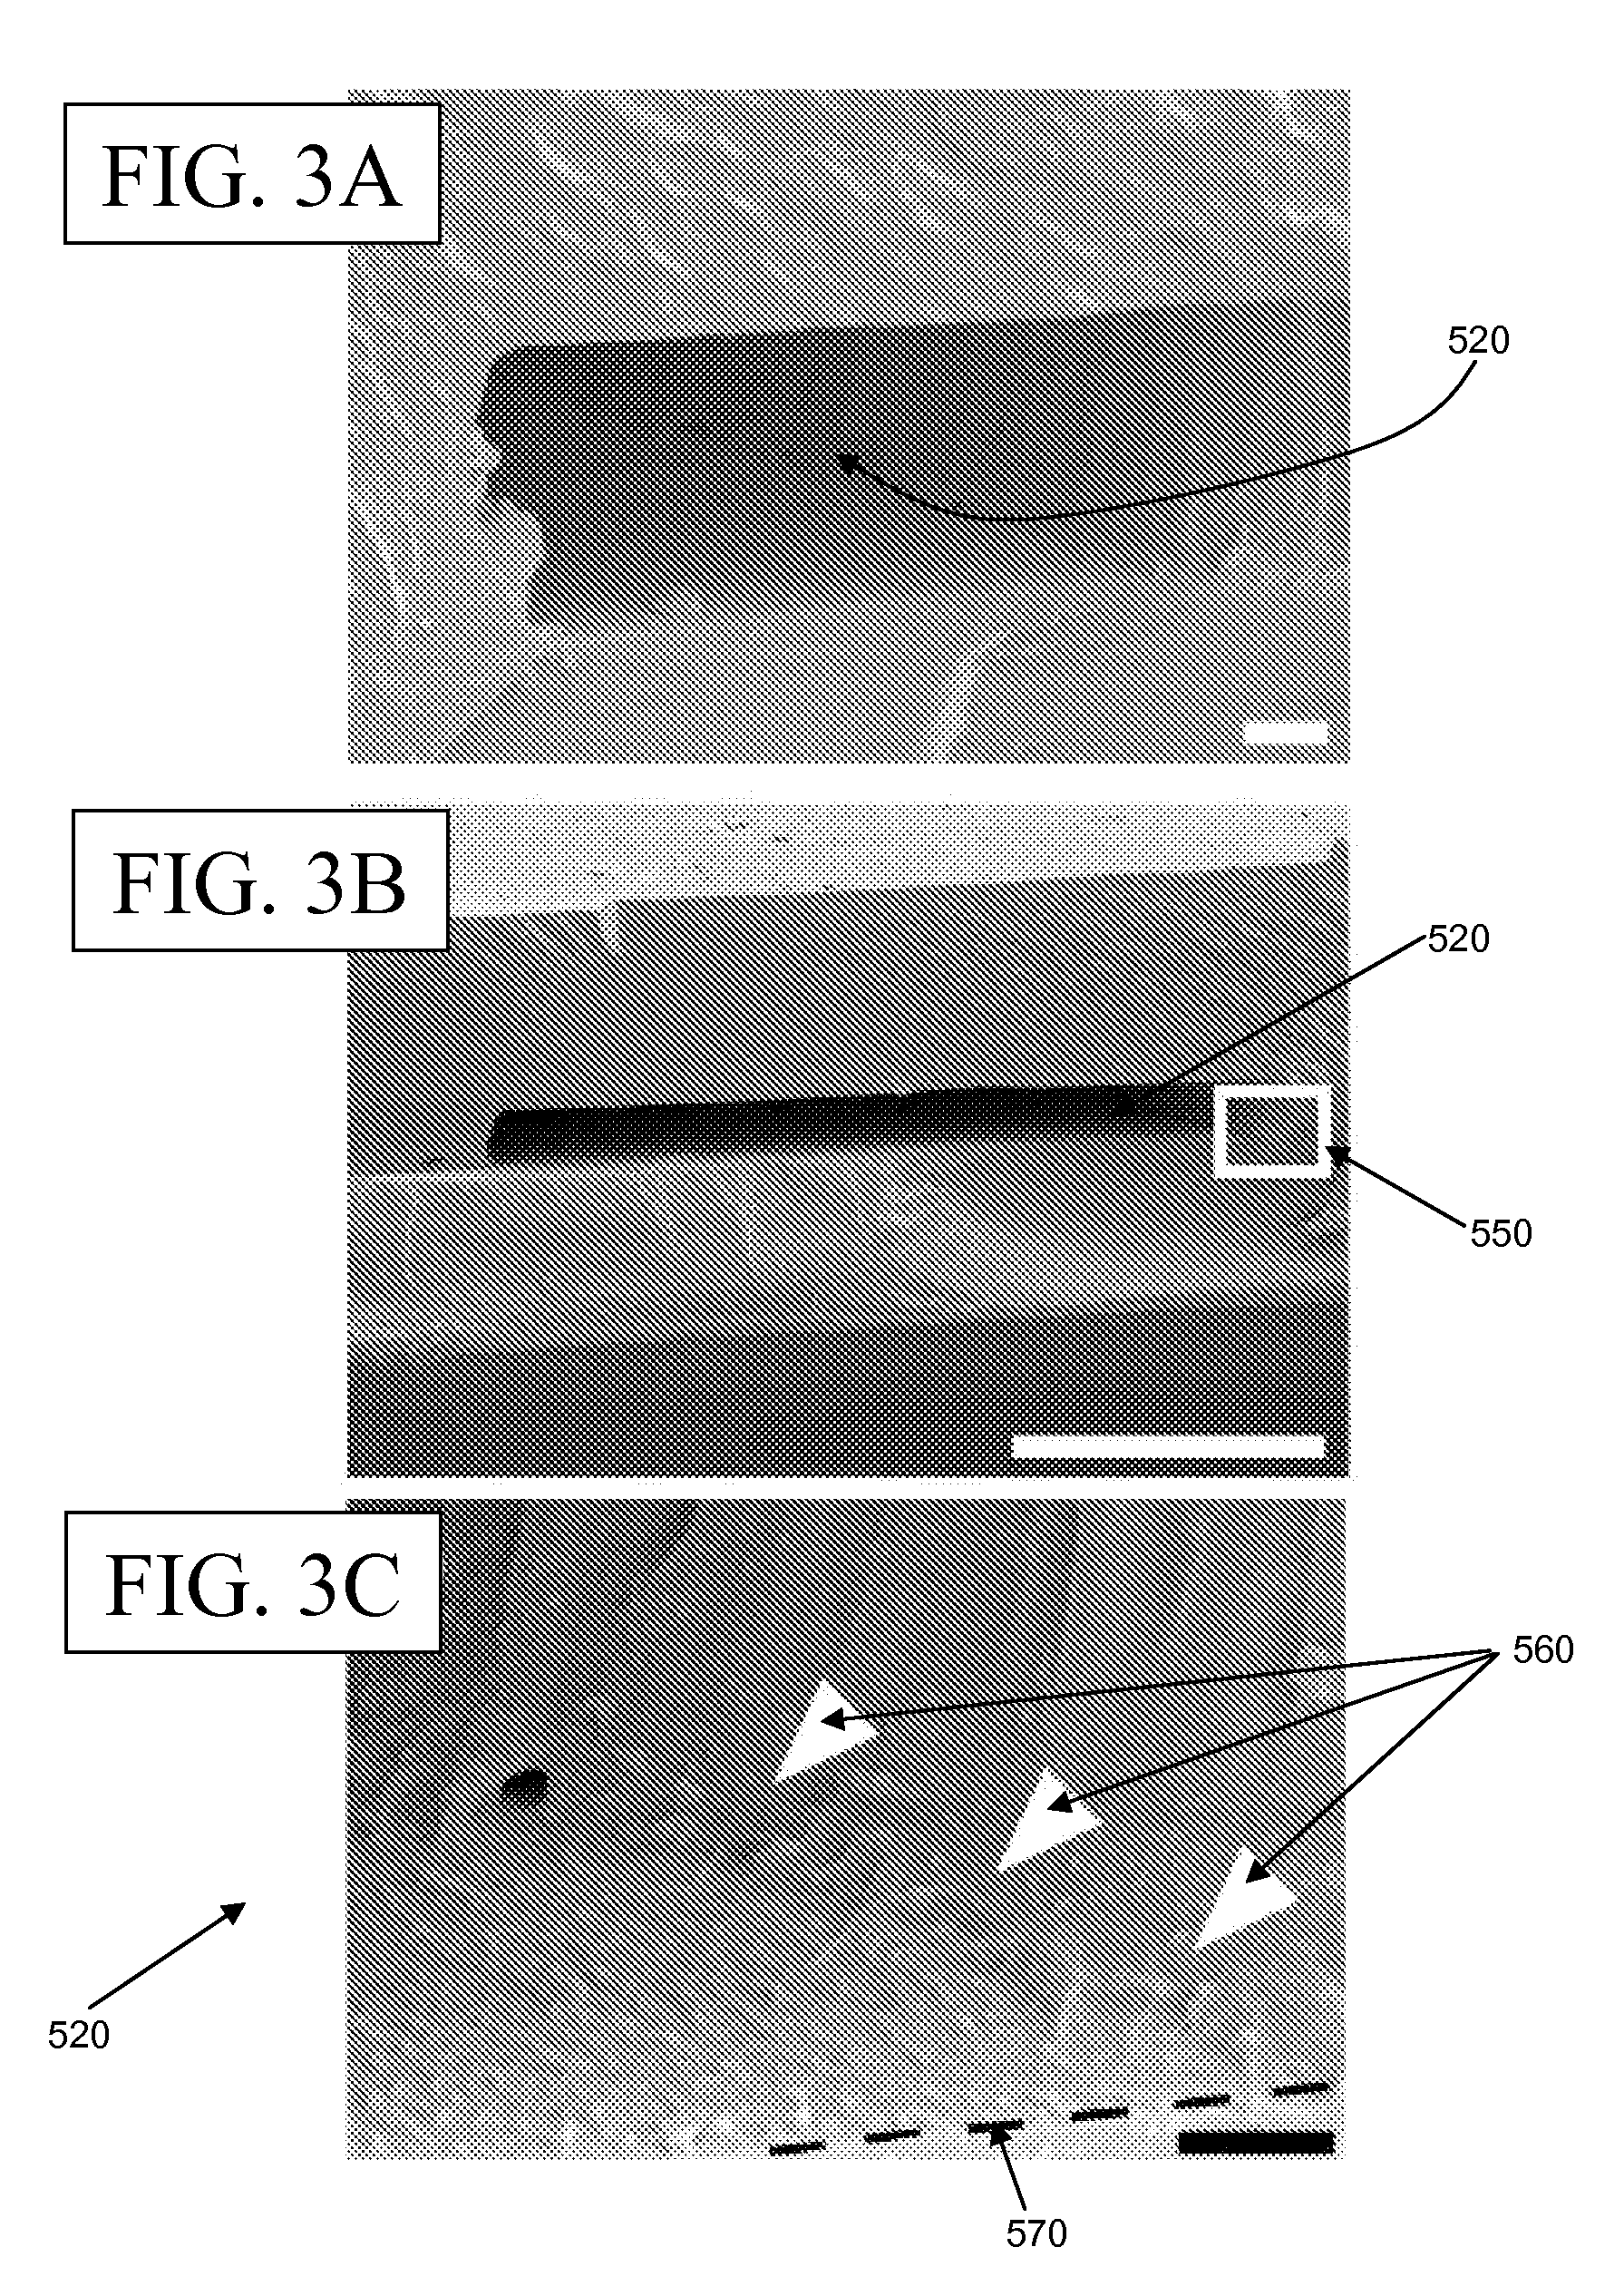 Microfluidic device comprising silk films coupled to form a microchannel